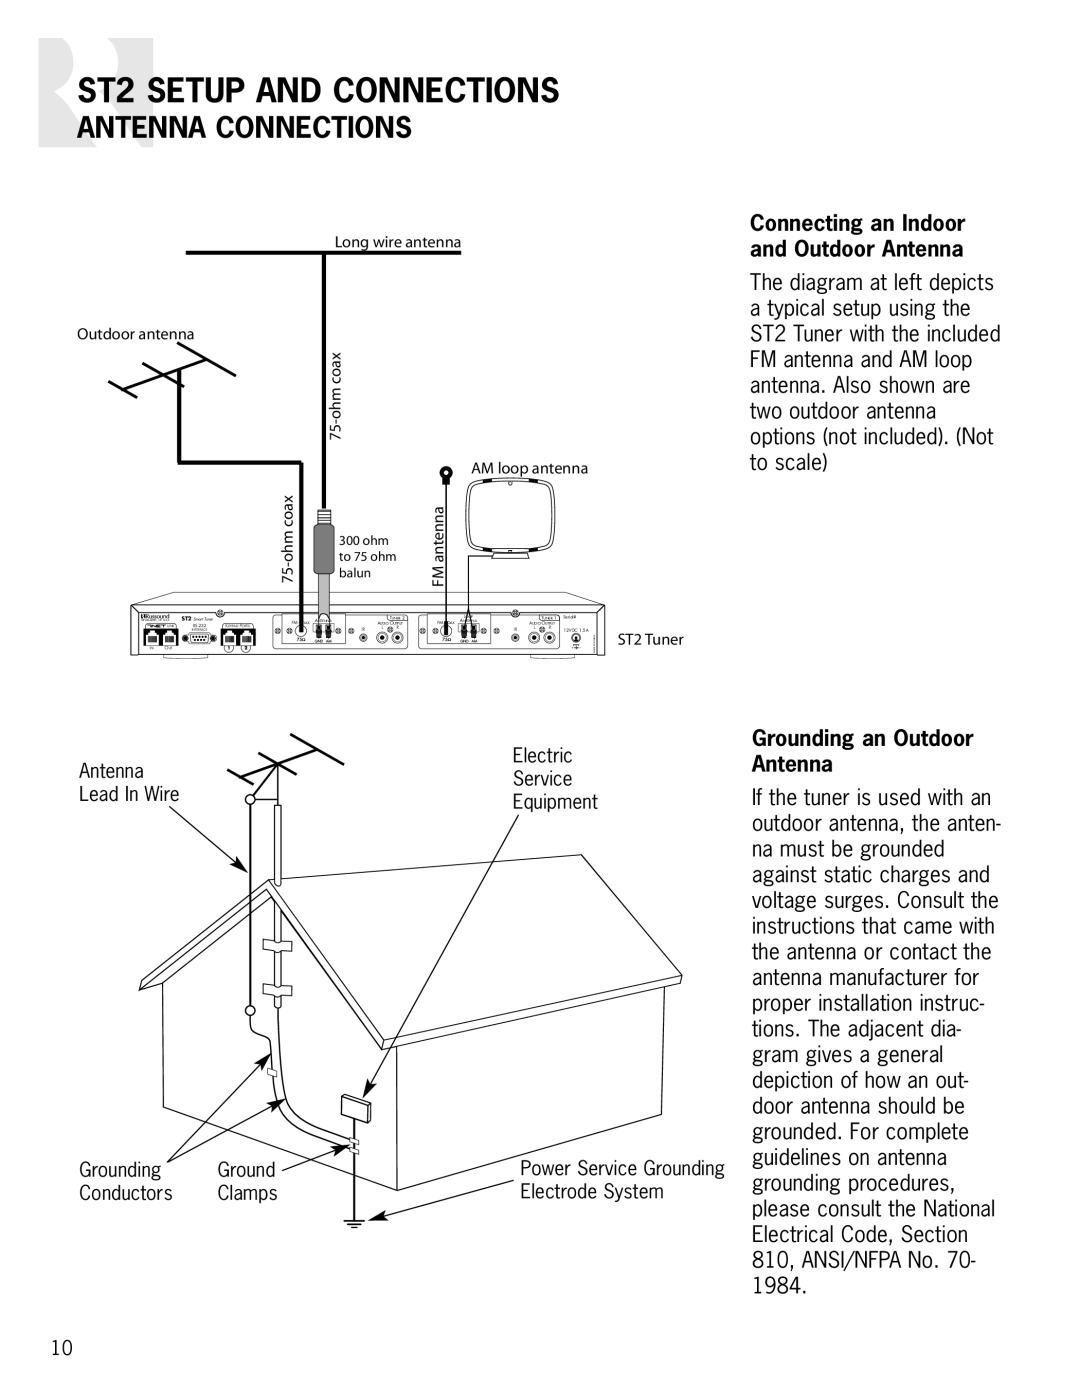 Russound ST2 instruction manual Antenna Connections, Connecting an Indoor and Outdoor Antenna, Grounding an Outdoor Antenna 